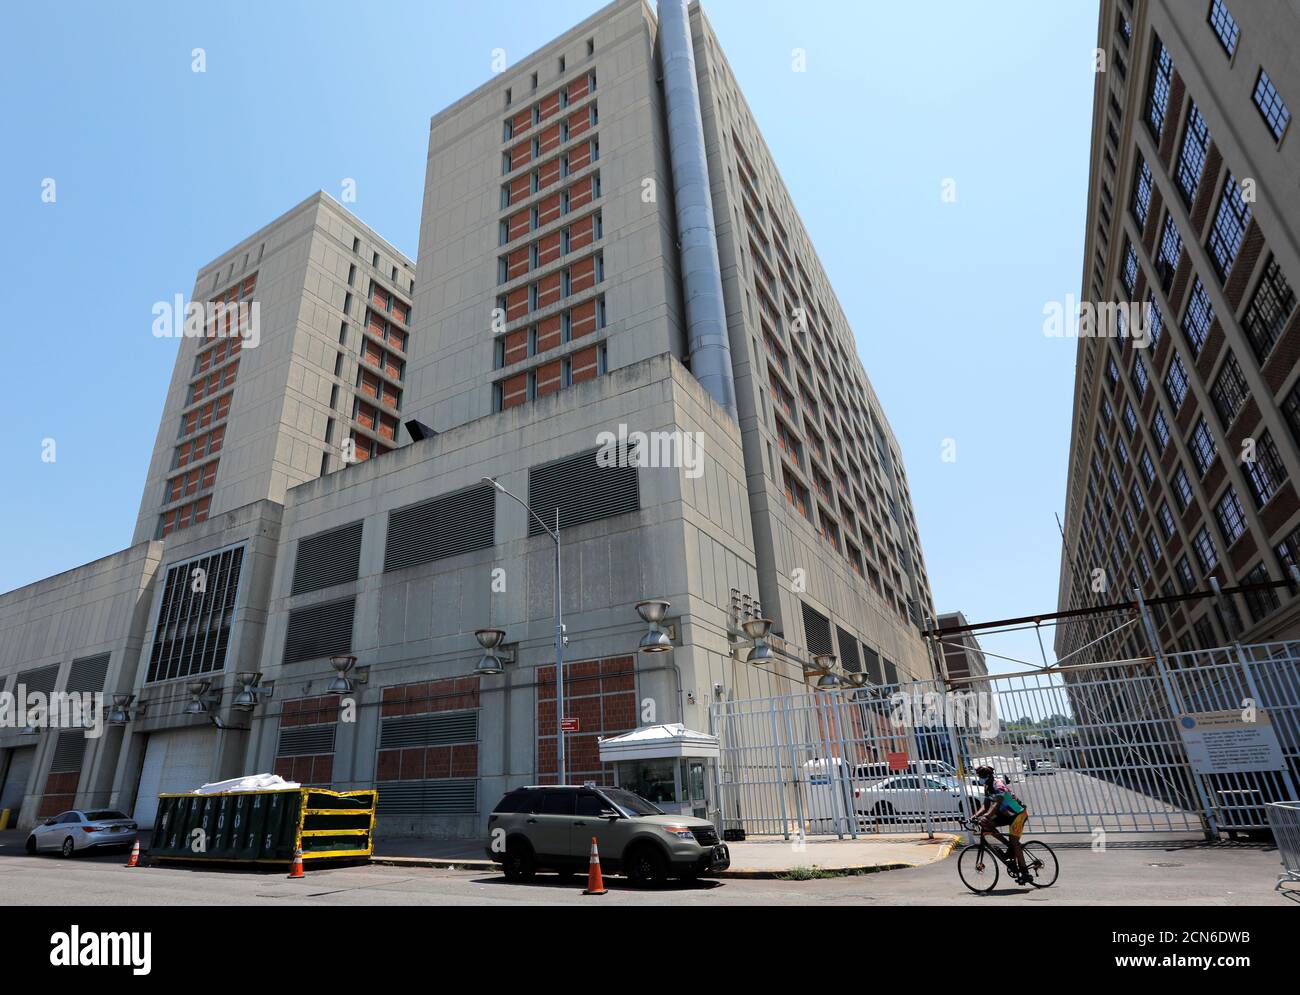 The Metropolitan Detention Center (MDC) where Ghislaine Maxwell, the  alleged accomplice of the late financier Jeffrey Epstein, has been moved to  according to the U.S. Federal Bureau of Prisons, is pictured in